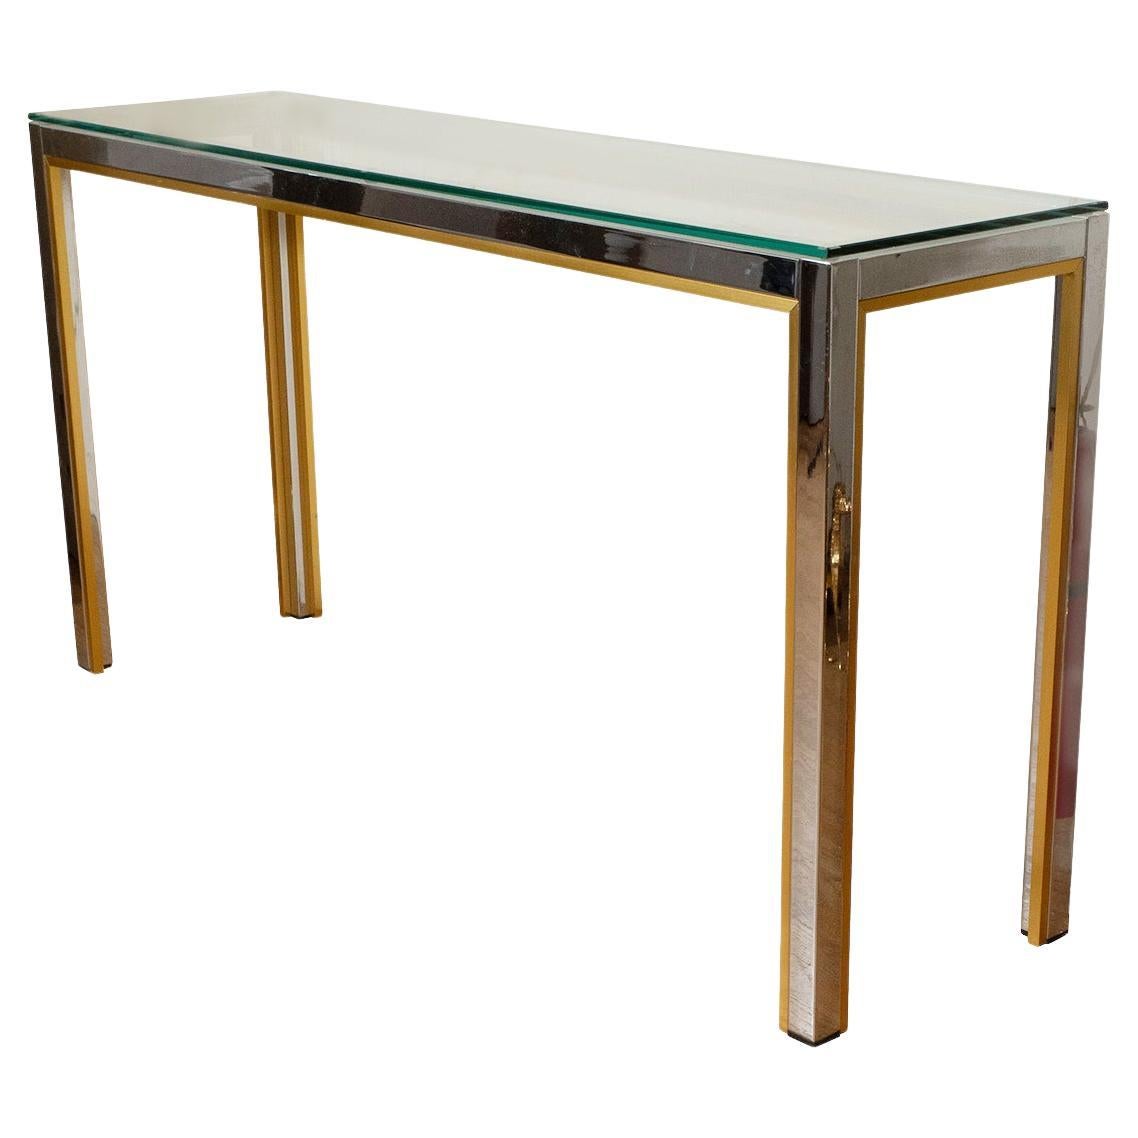 Pair of Nickel-Plated and Glass Console Tables For Sale at 1stDibs